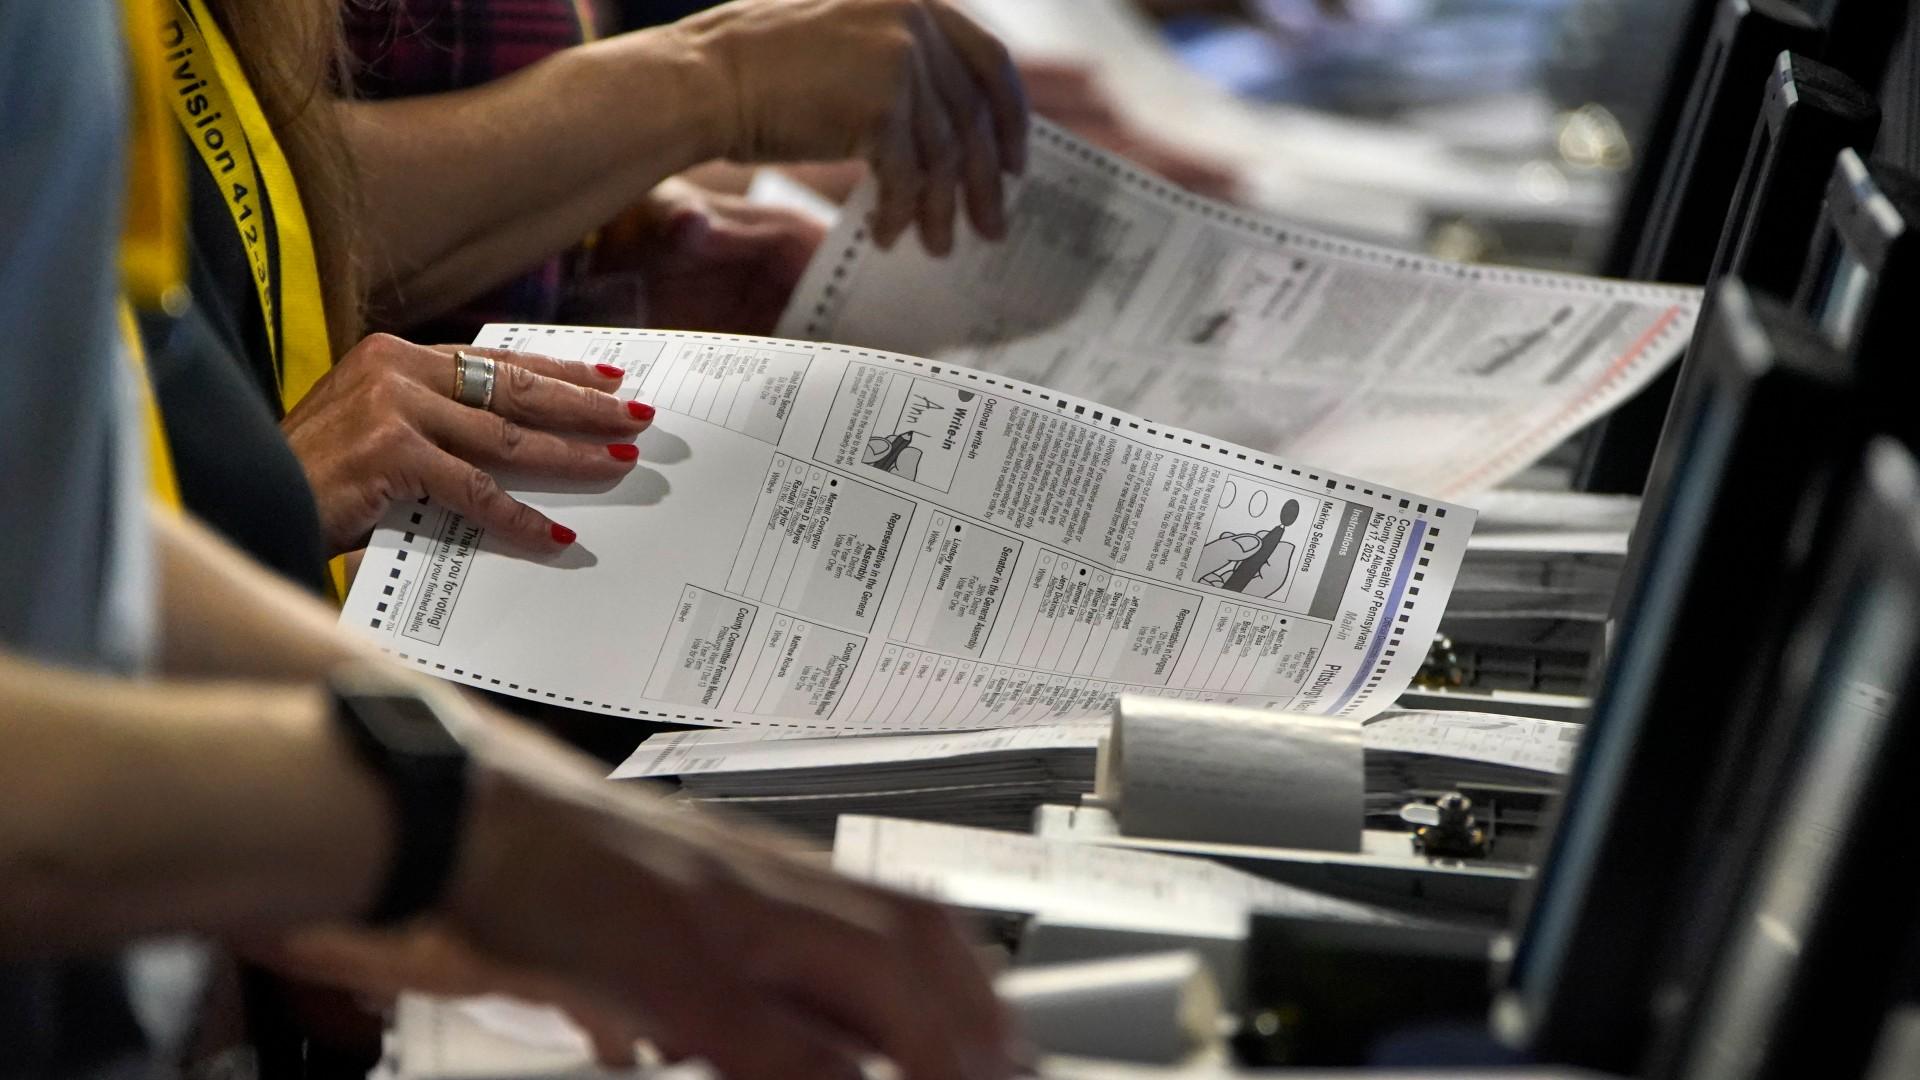 Election workers perform a recount of ballots from the recent Pennsylvania primary election at the Allegheny County Election Division warehouse on the Northside of Pittsburgh, June 1, 2022. (AP Photo / Gene J. Puskar, File)